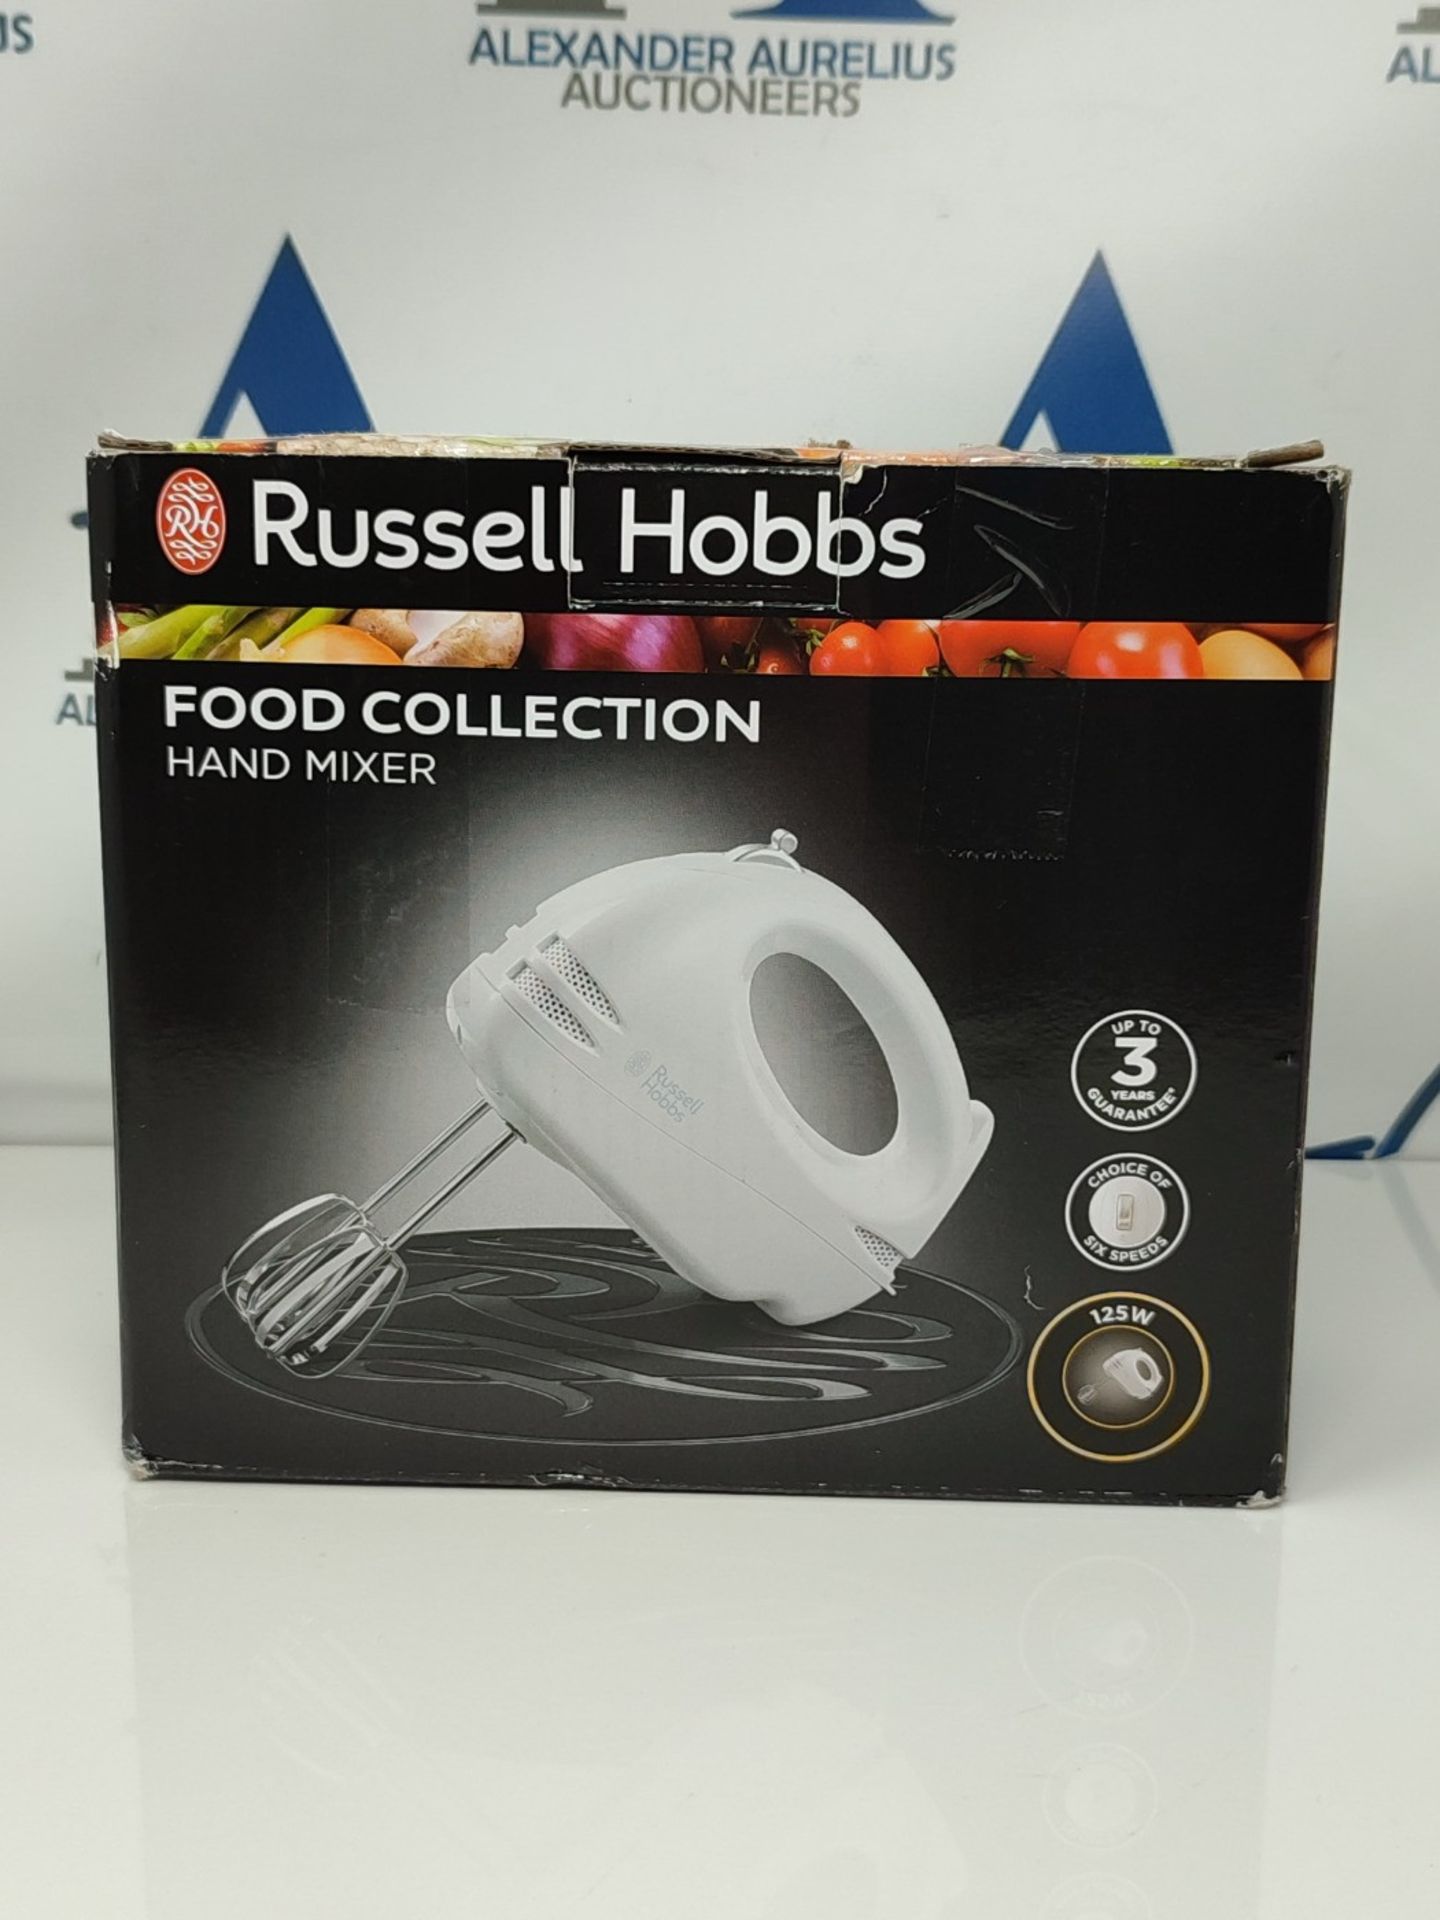 Russell Hobbs Food Collection Hand Mixer with 6 Speed 14451, 125 W - White - Image 2 of 3